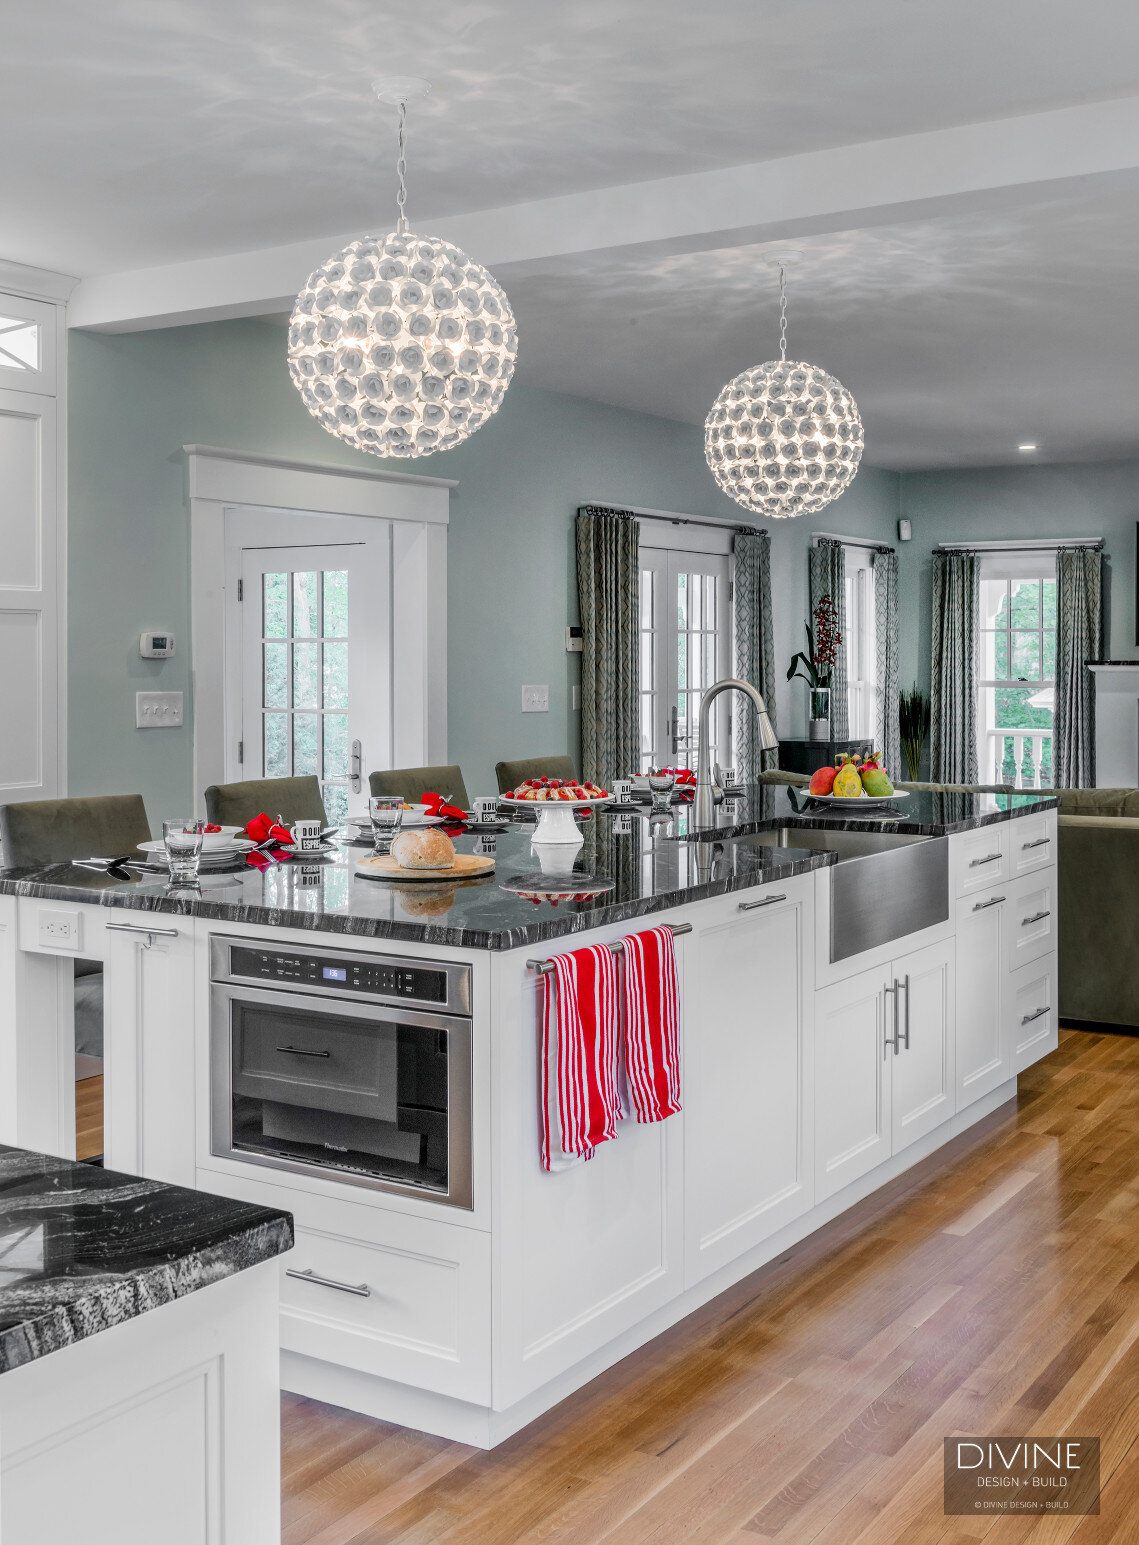  Floral sphere pendant lights with glass tiled back splash. Wolf appliances, stainless steel farmhouse sink. Granite countertops, and white shaker style cabinets.